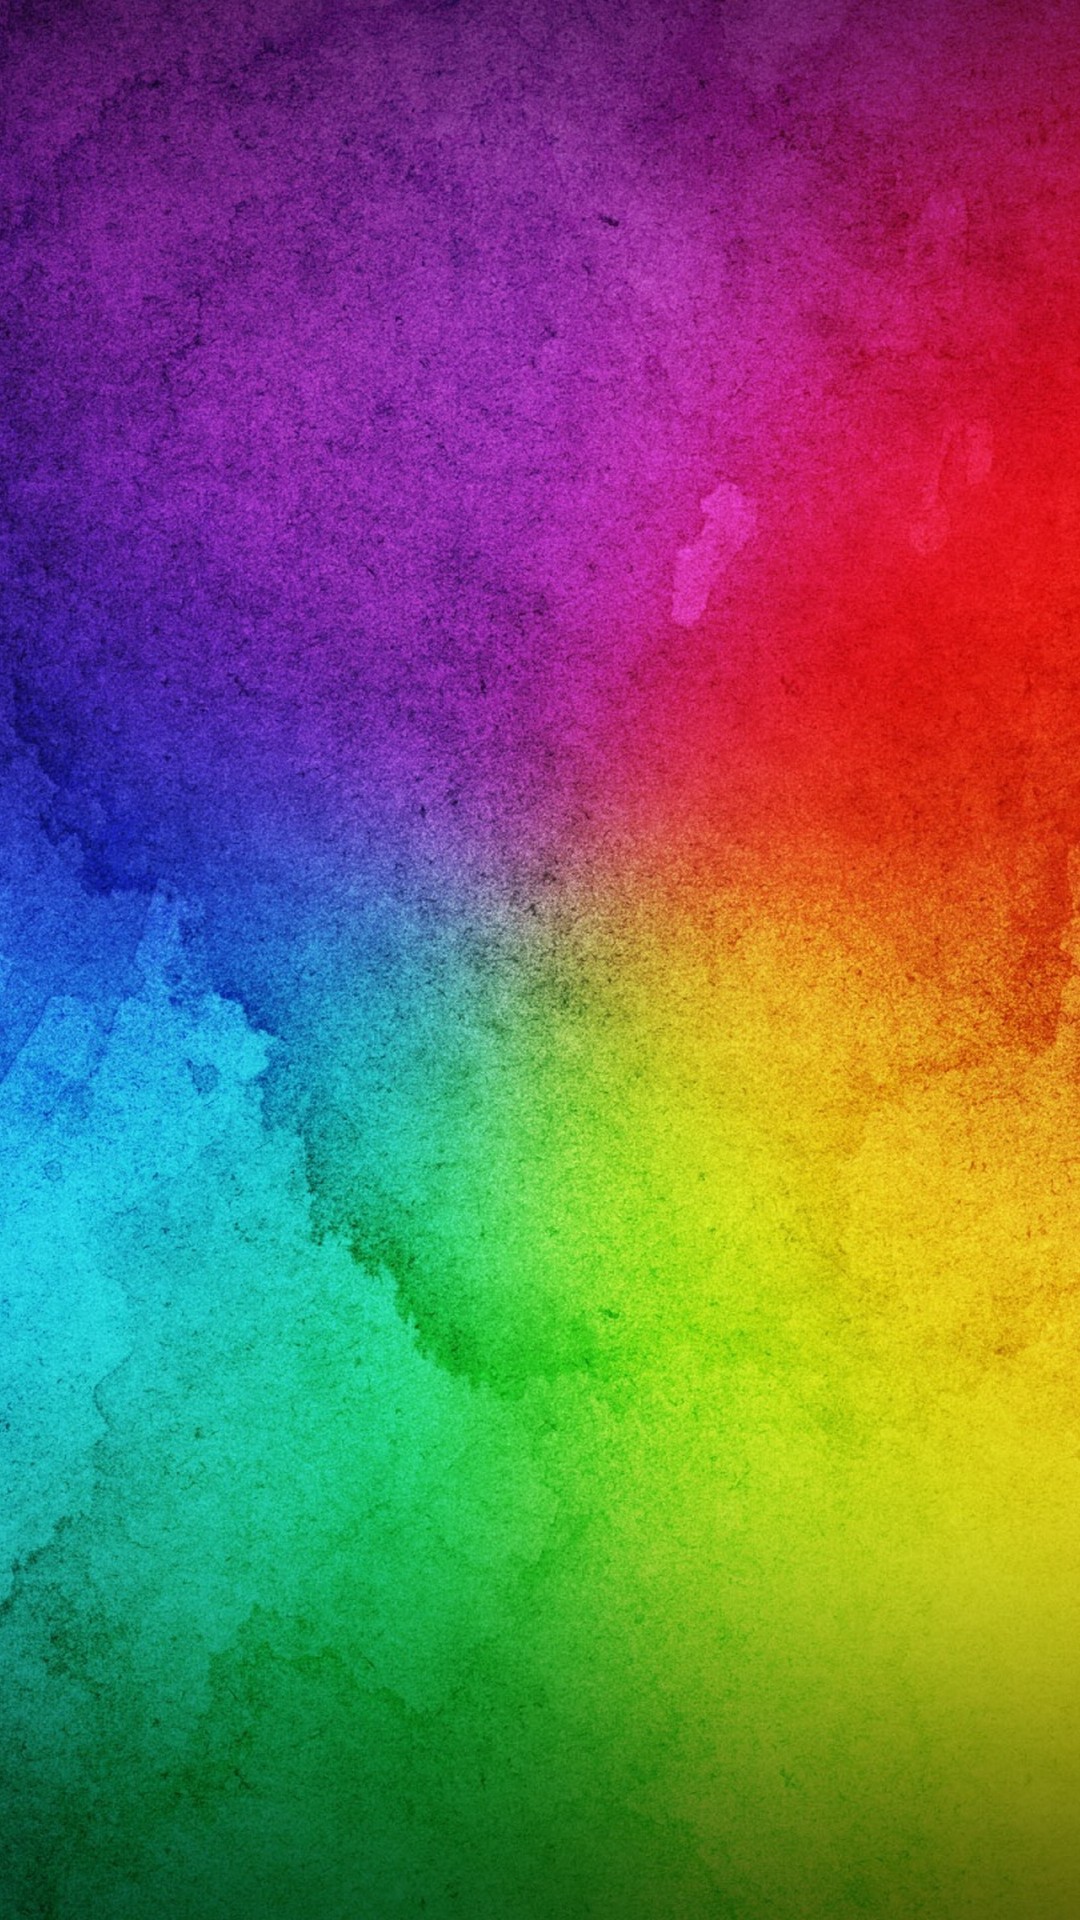 Rainbow i Phones Wallpaper With high-resolution 1080X1920 pixel. Download all Mobile Wallpapers and Use them as wallpapers for your iPhone, Tablet, iPad, Android and other mobile devices